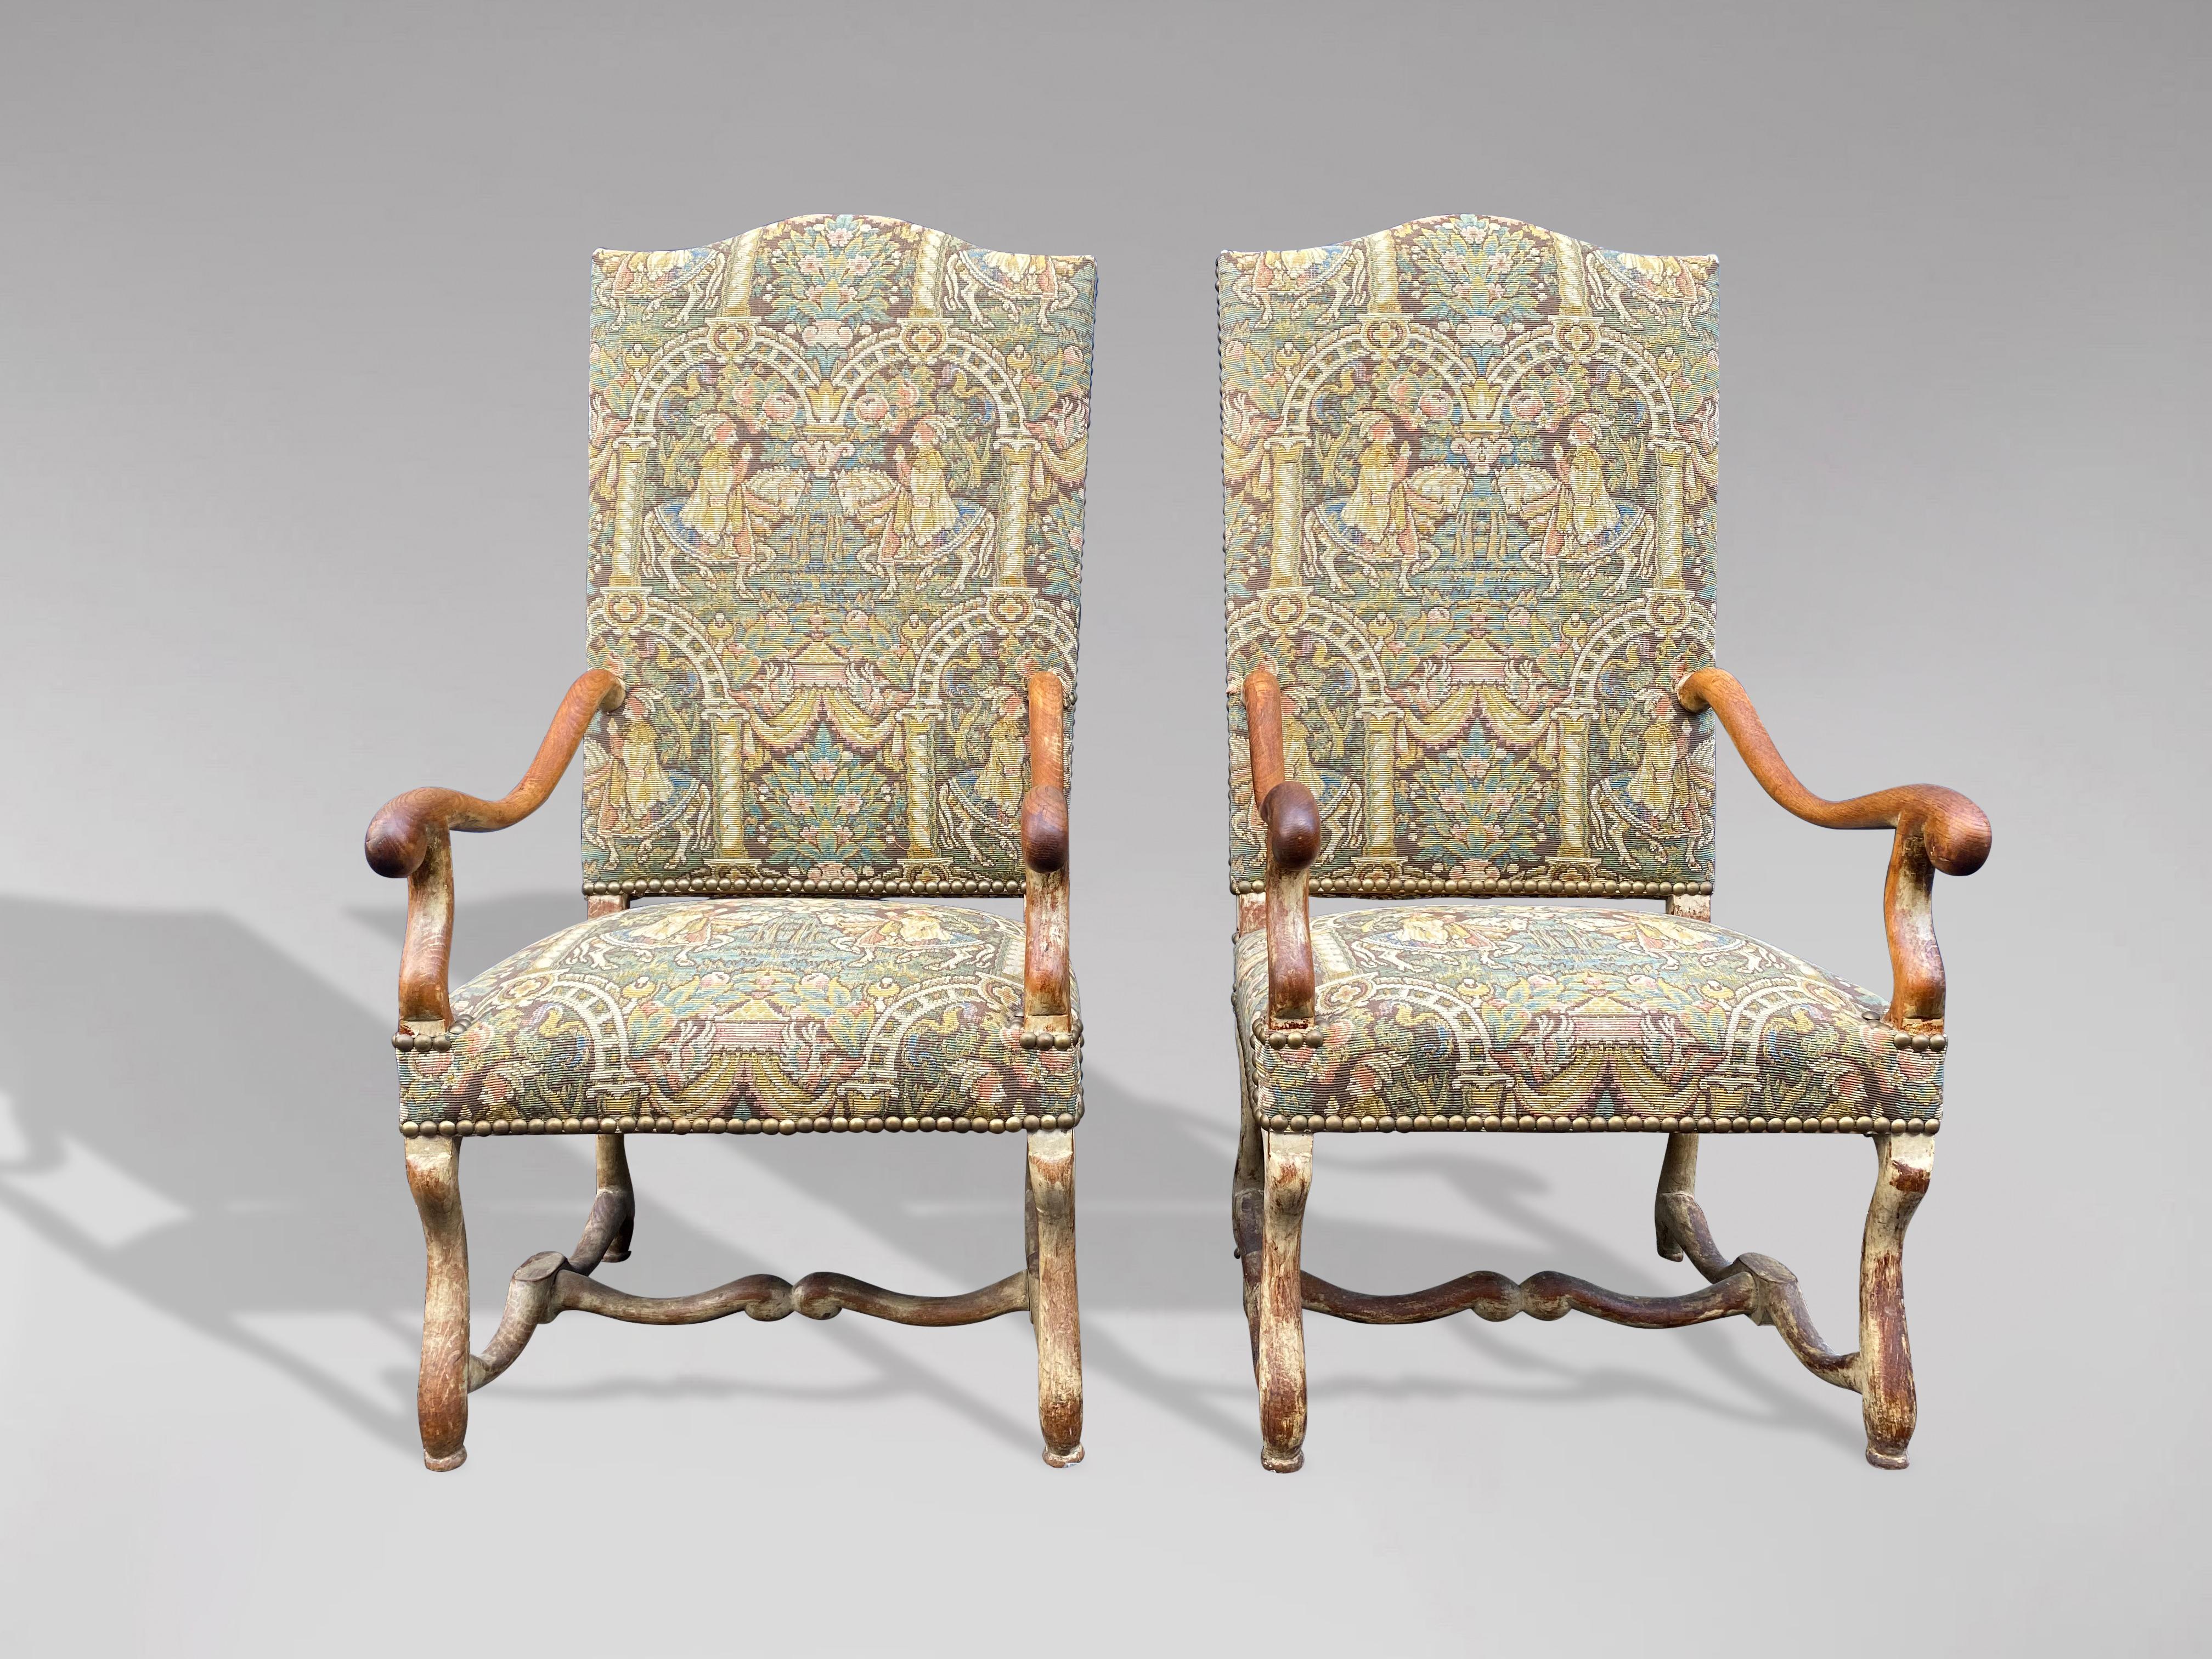 A pair of late 19th century French Louis XIII style walnut os de mouton armchairs or fauteuils, with slanted camelbacks, large scrolling arms, cross stretchers. Each armchair features a tall, slightly slanted camelback, connected to two large